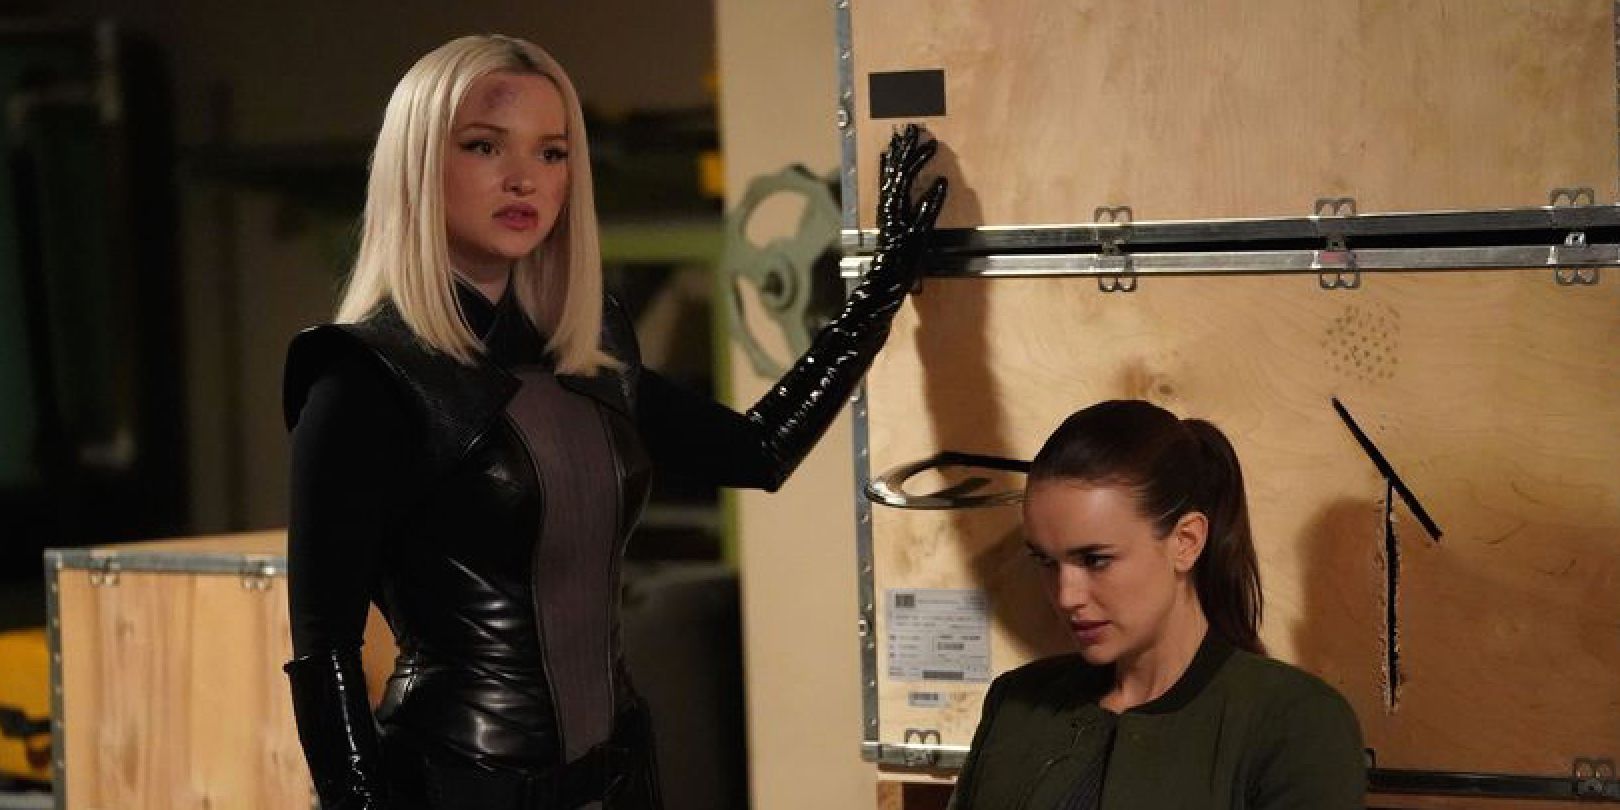 Ruby Plays Target Practice With Jemma Simmons In Agents Of SHIELD